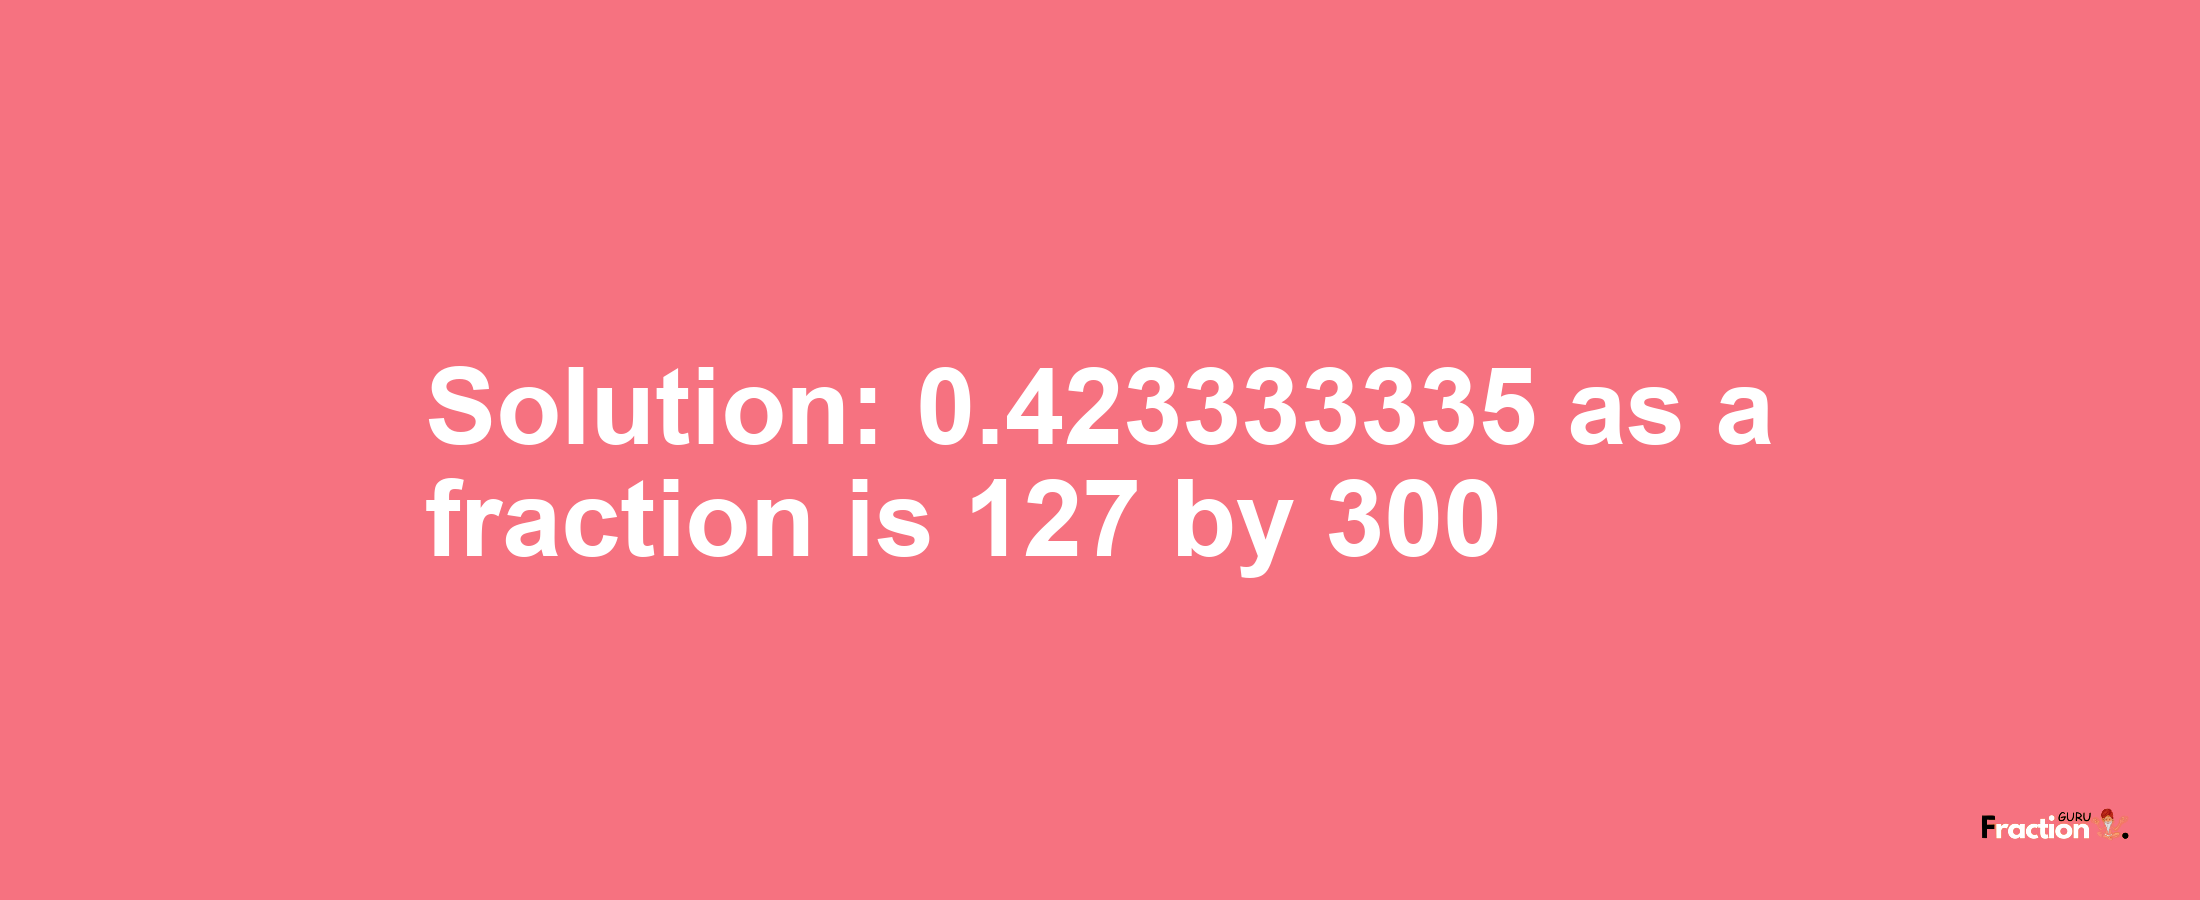 Solution:0.423333335 as a fraction is 127/300